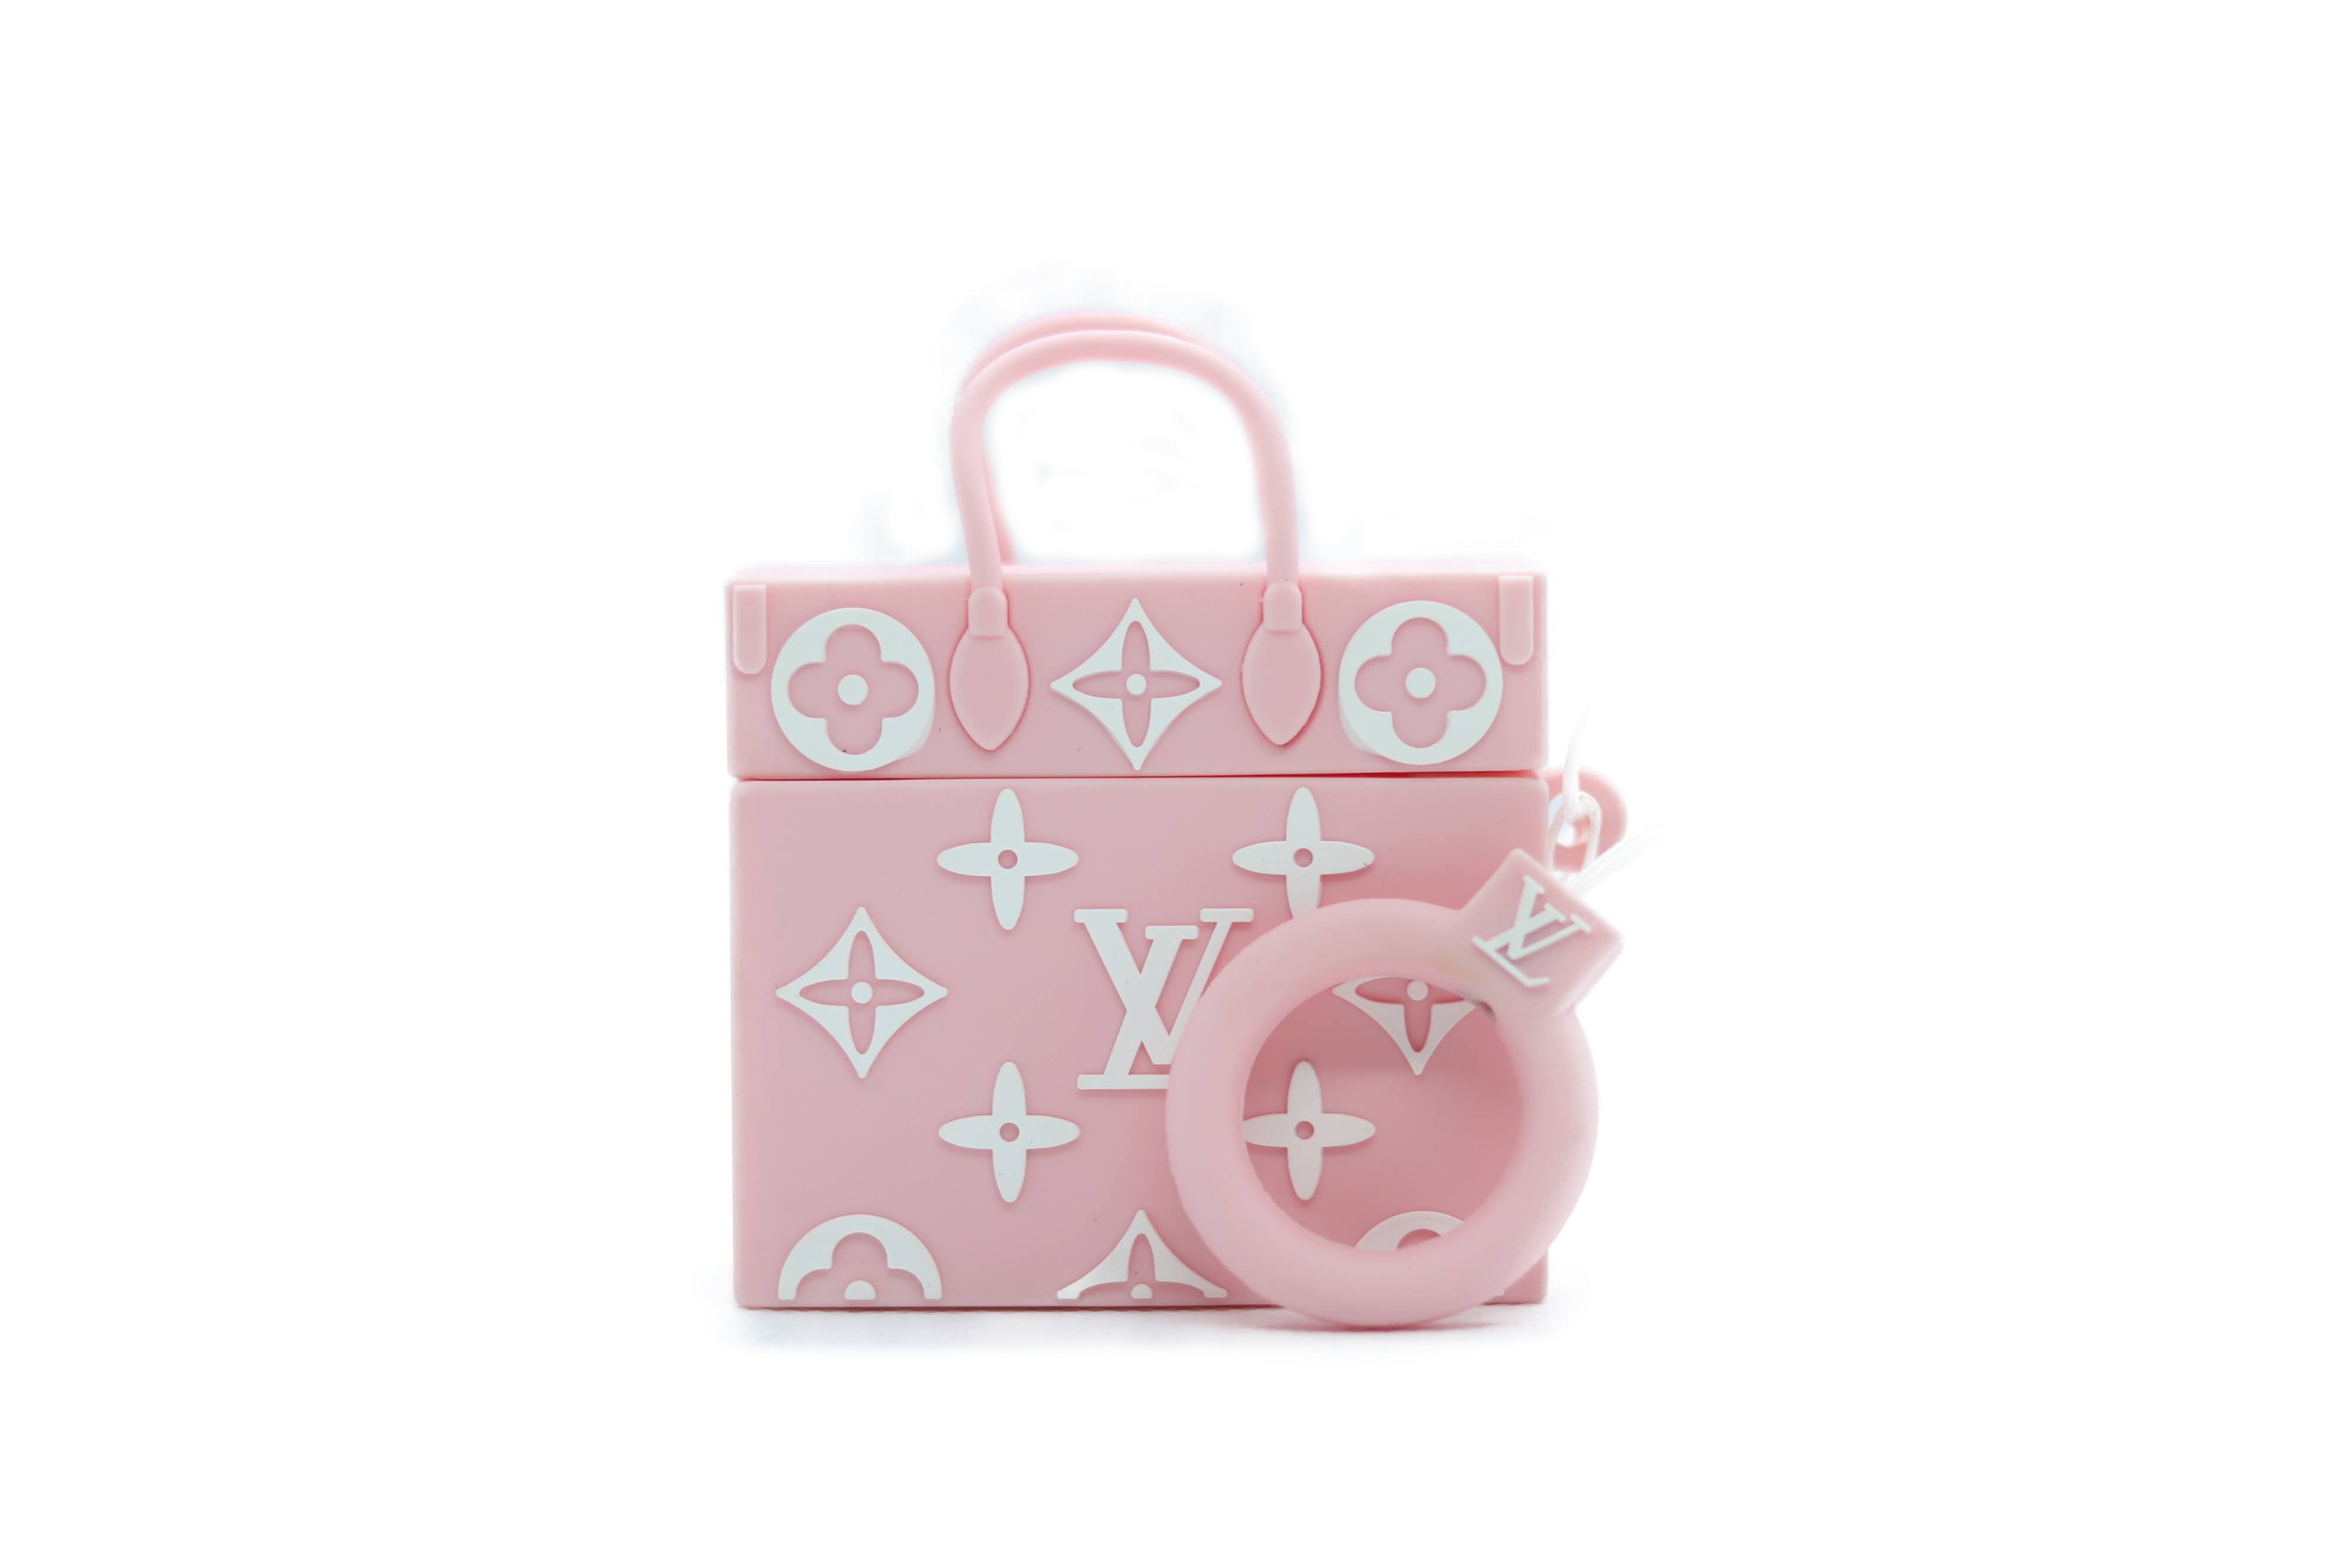 Lulu Shopping Tote AirPods Case